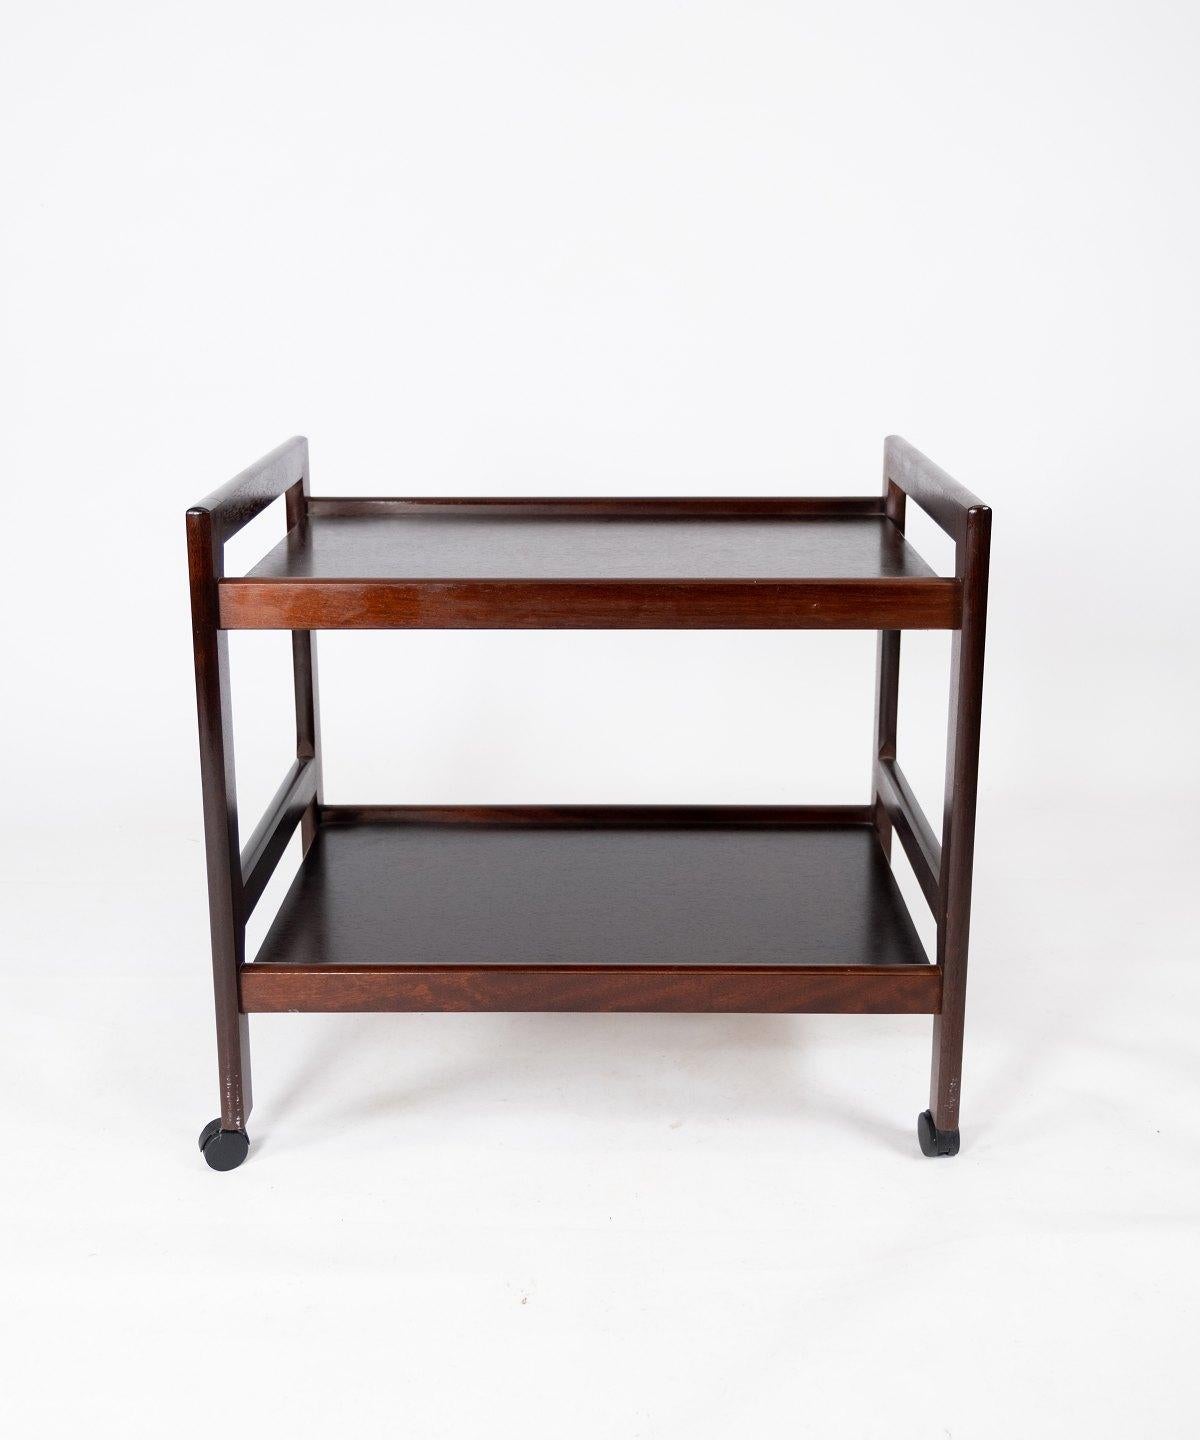 This Danish-designed trolley table from the 1960s combines sleek design with practical functionality. Crafted from rich mahogany, it exudes warmth and sophistication, adding a touch of elegance to any room.

Featuring clean lines and a minimalist